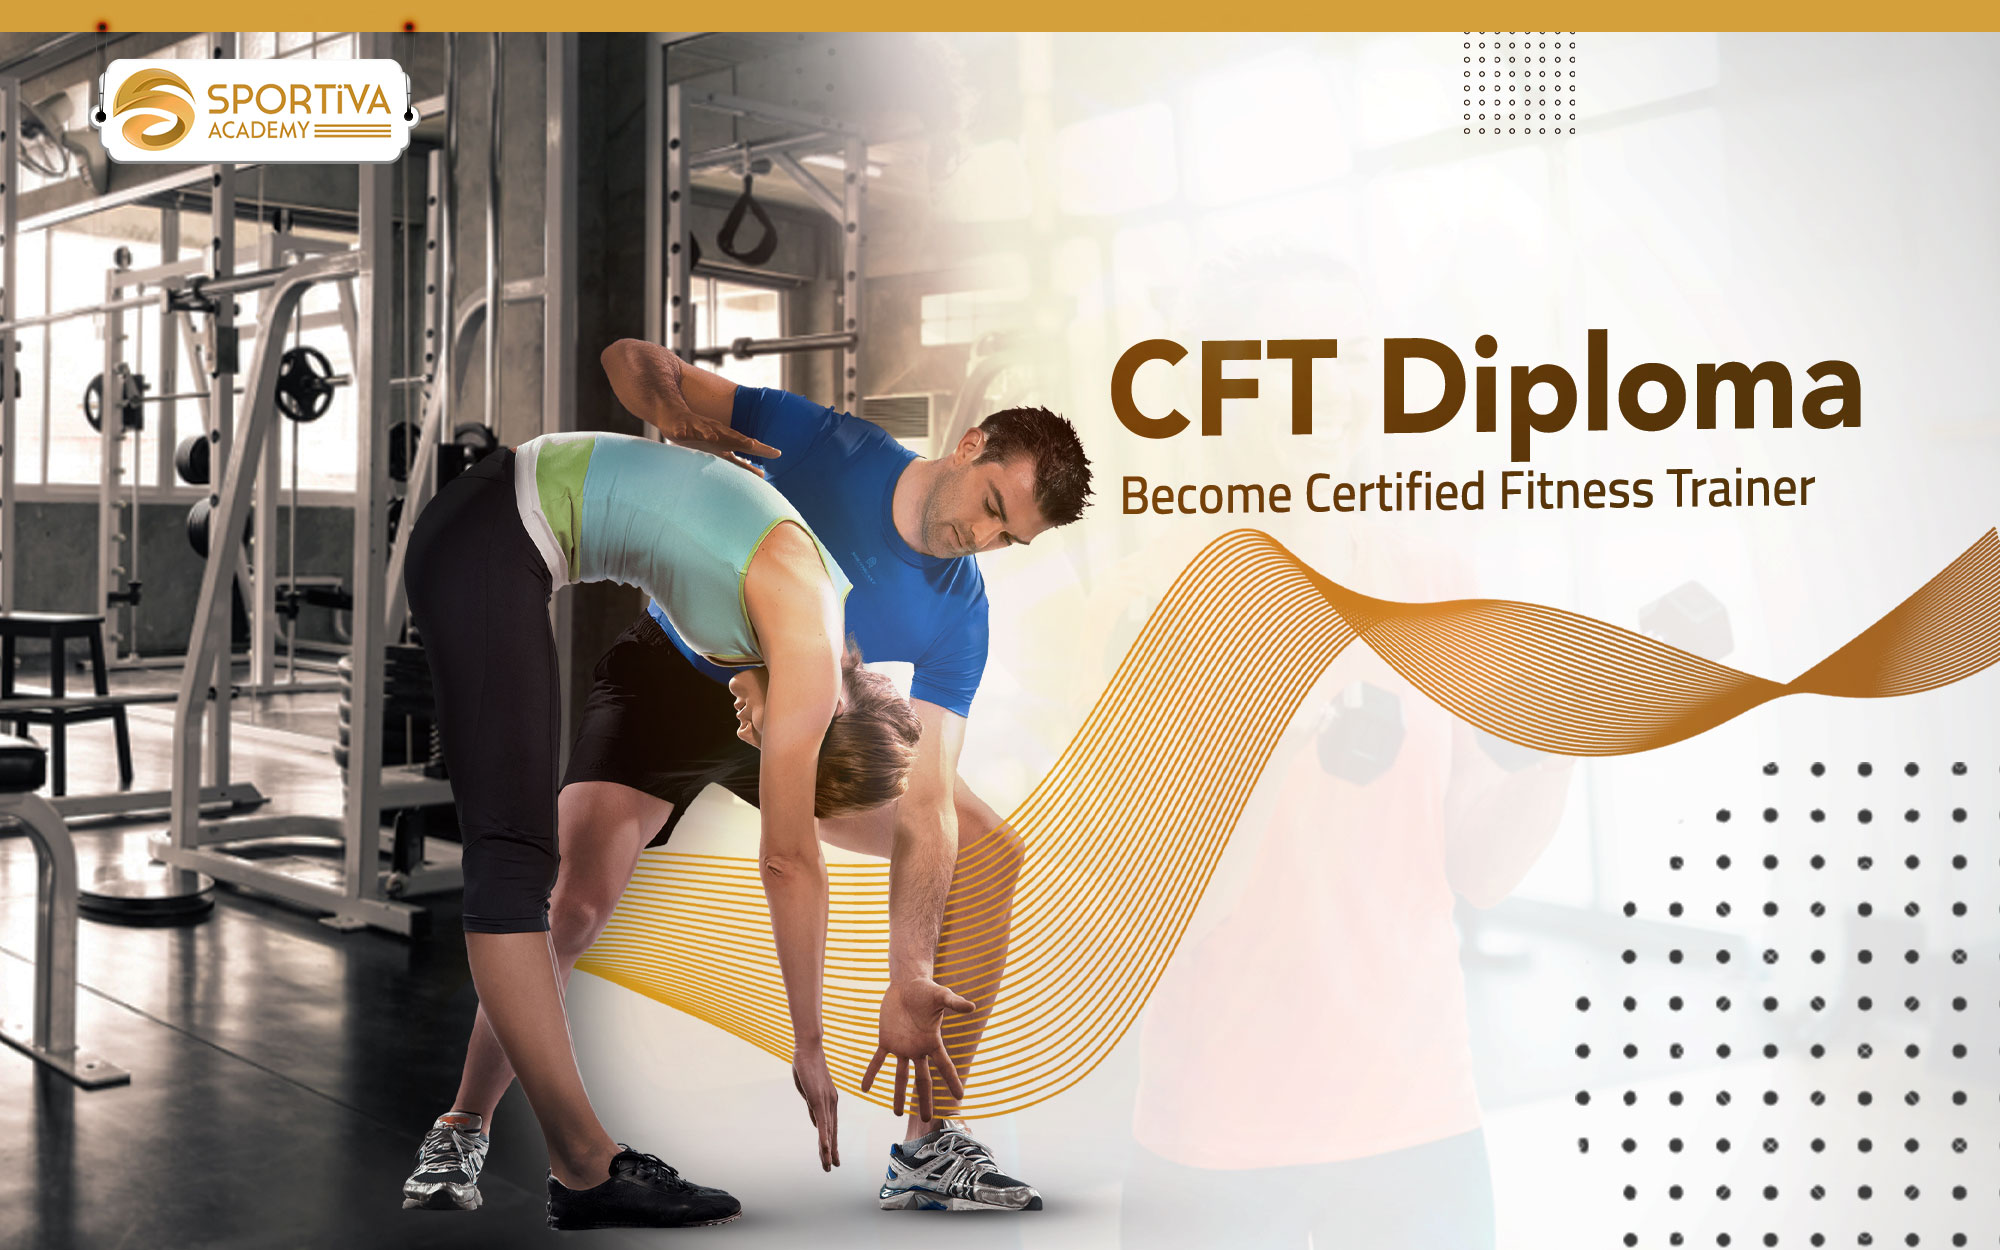 Personal trainer and fitness trainer diploma - Cairo